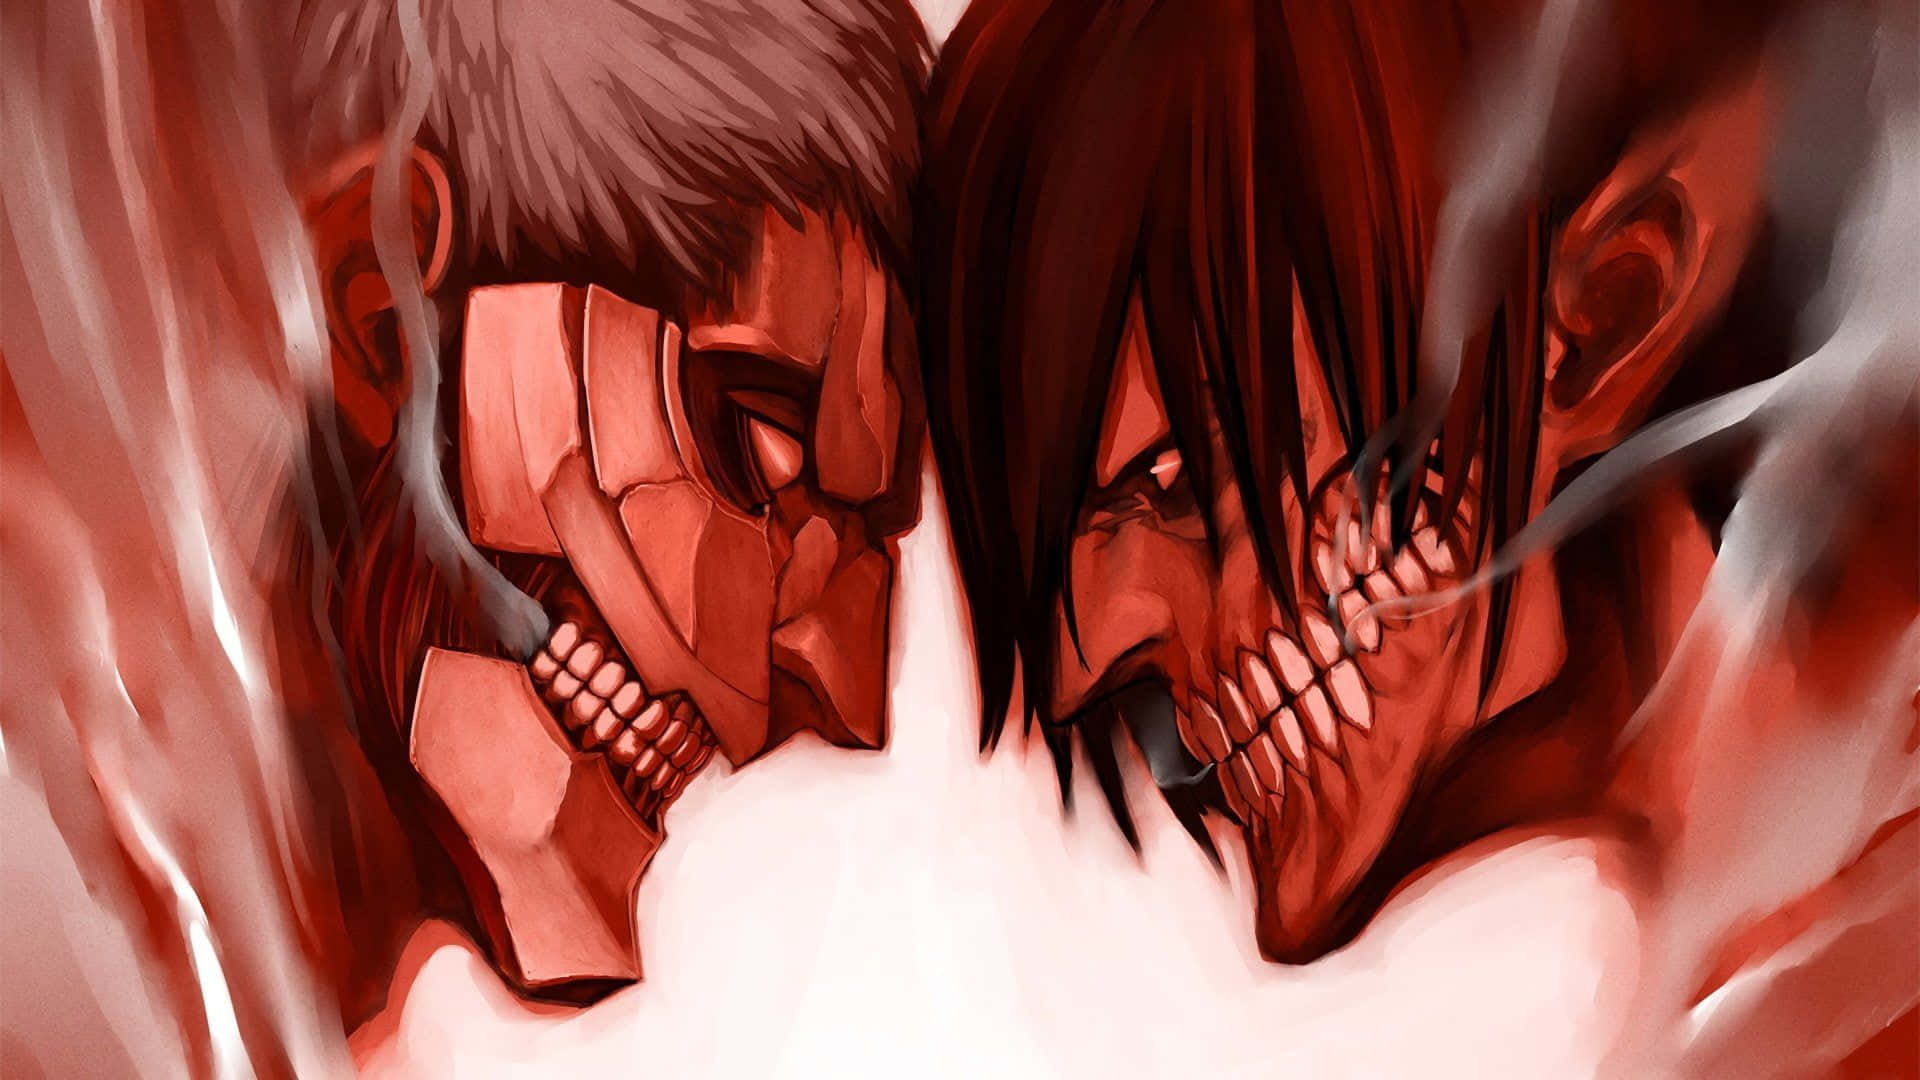 Aot Background